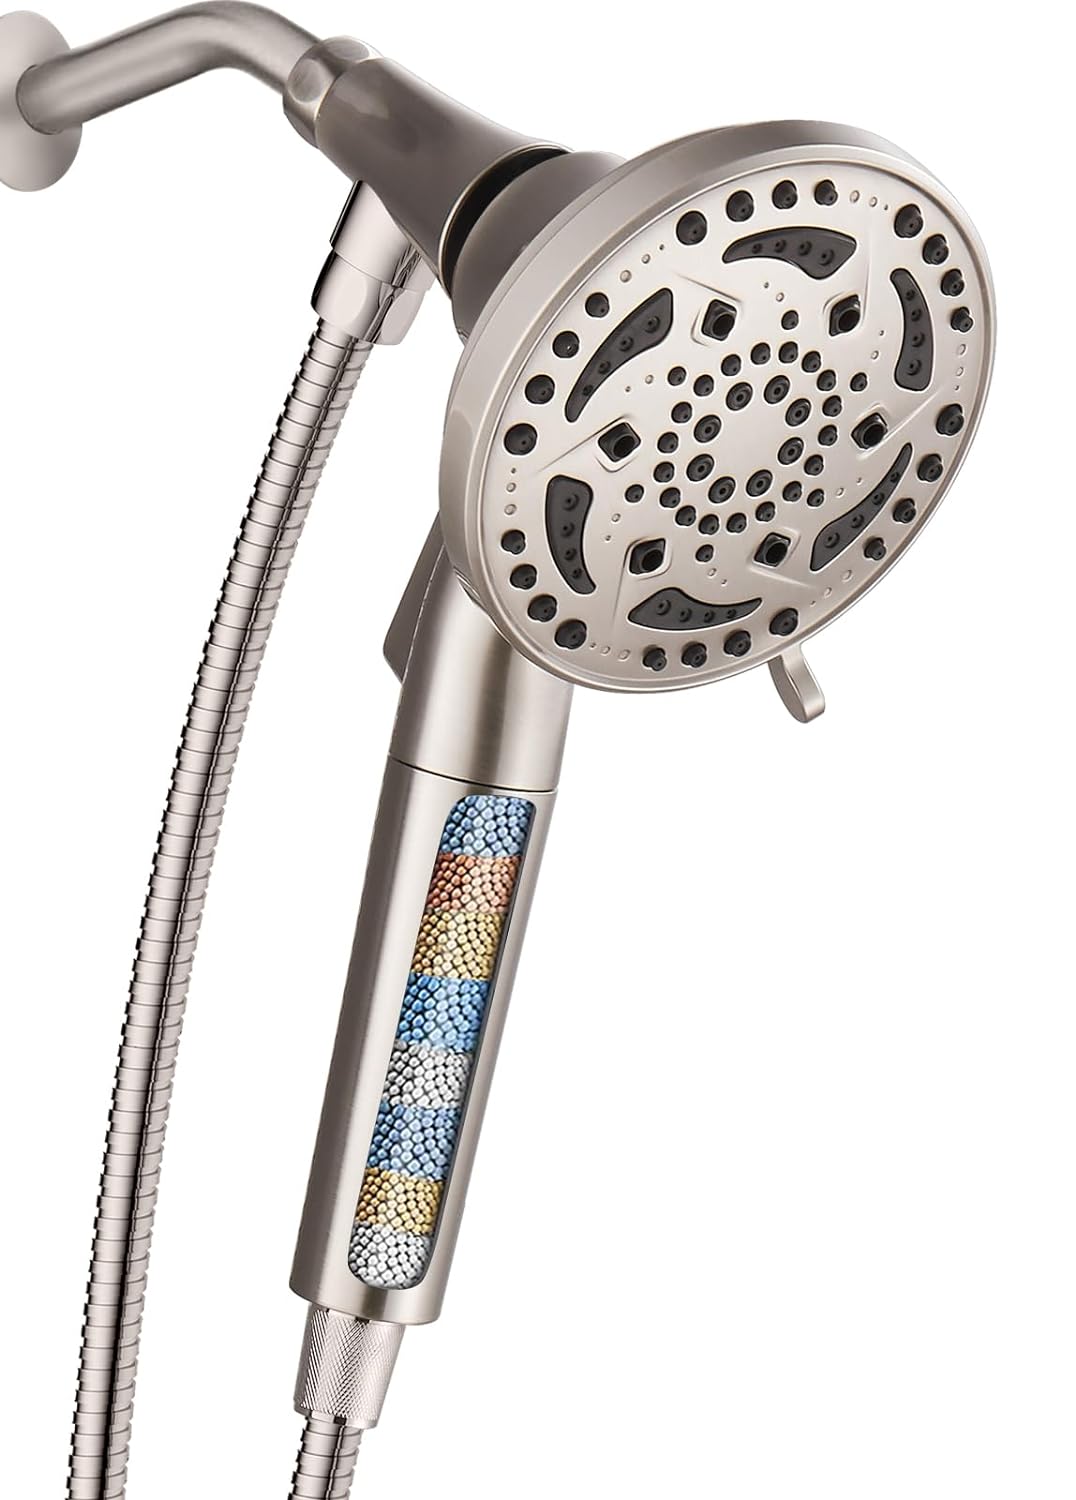 Cobbe Filtered Shower Head with handheld, High Pressure 7-mode Showerhead with Hose, Bracket, Water Softener Filters Beads for Hard Water Remove Chlorine and Harmful Substance, Brushed Nickel, U.S